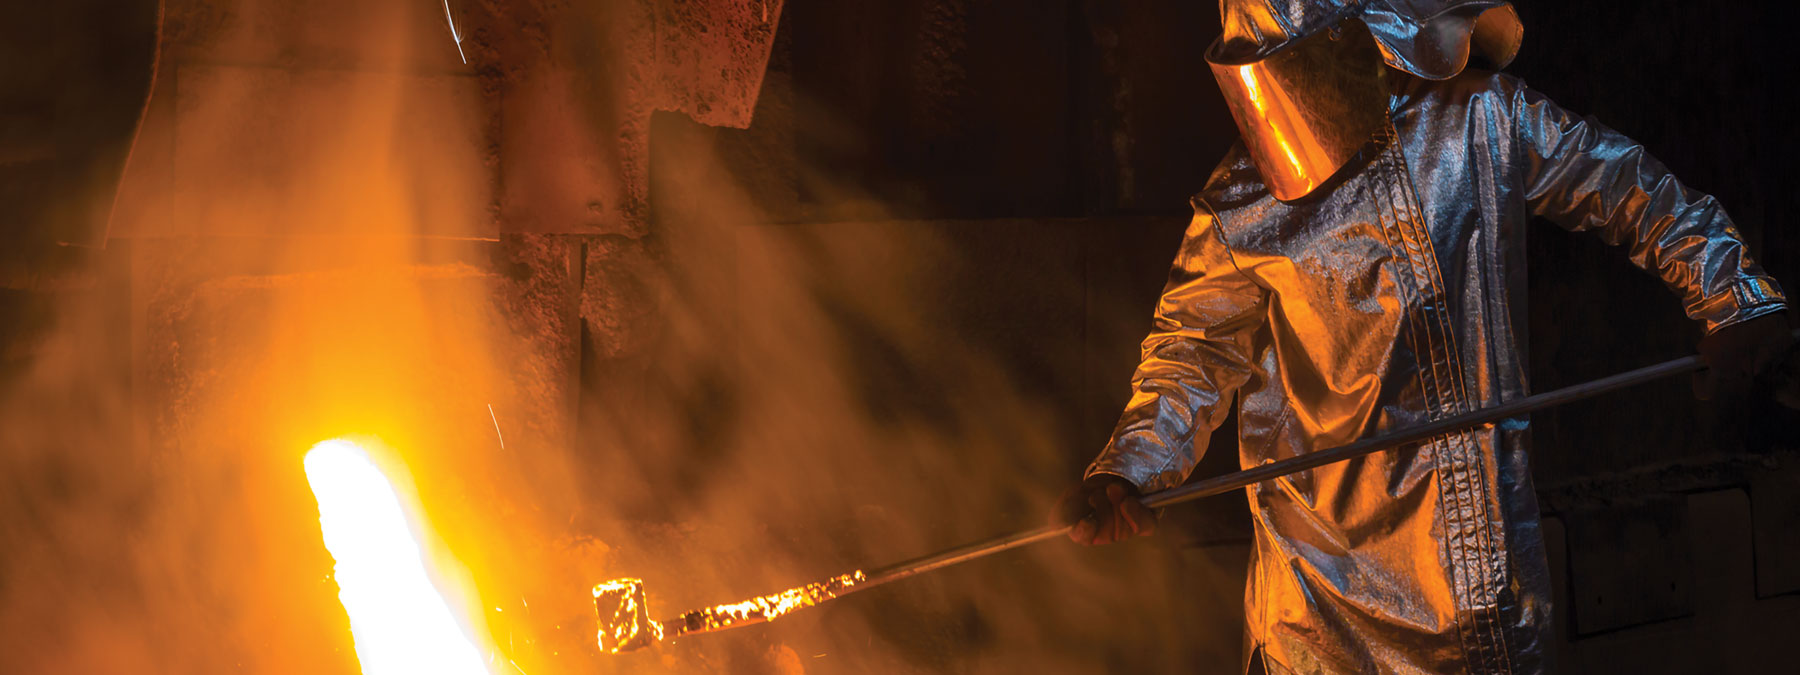 Supply chain transparency is the key to continuous improvement at VDM Metals